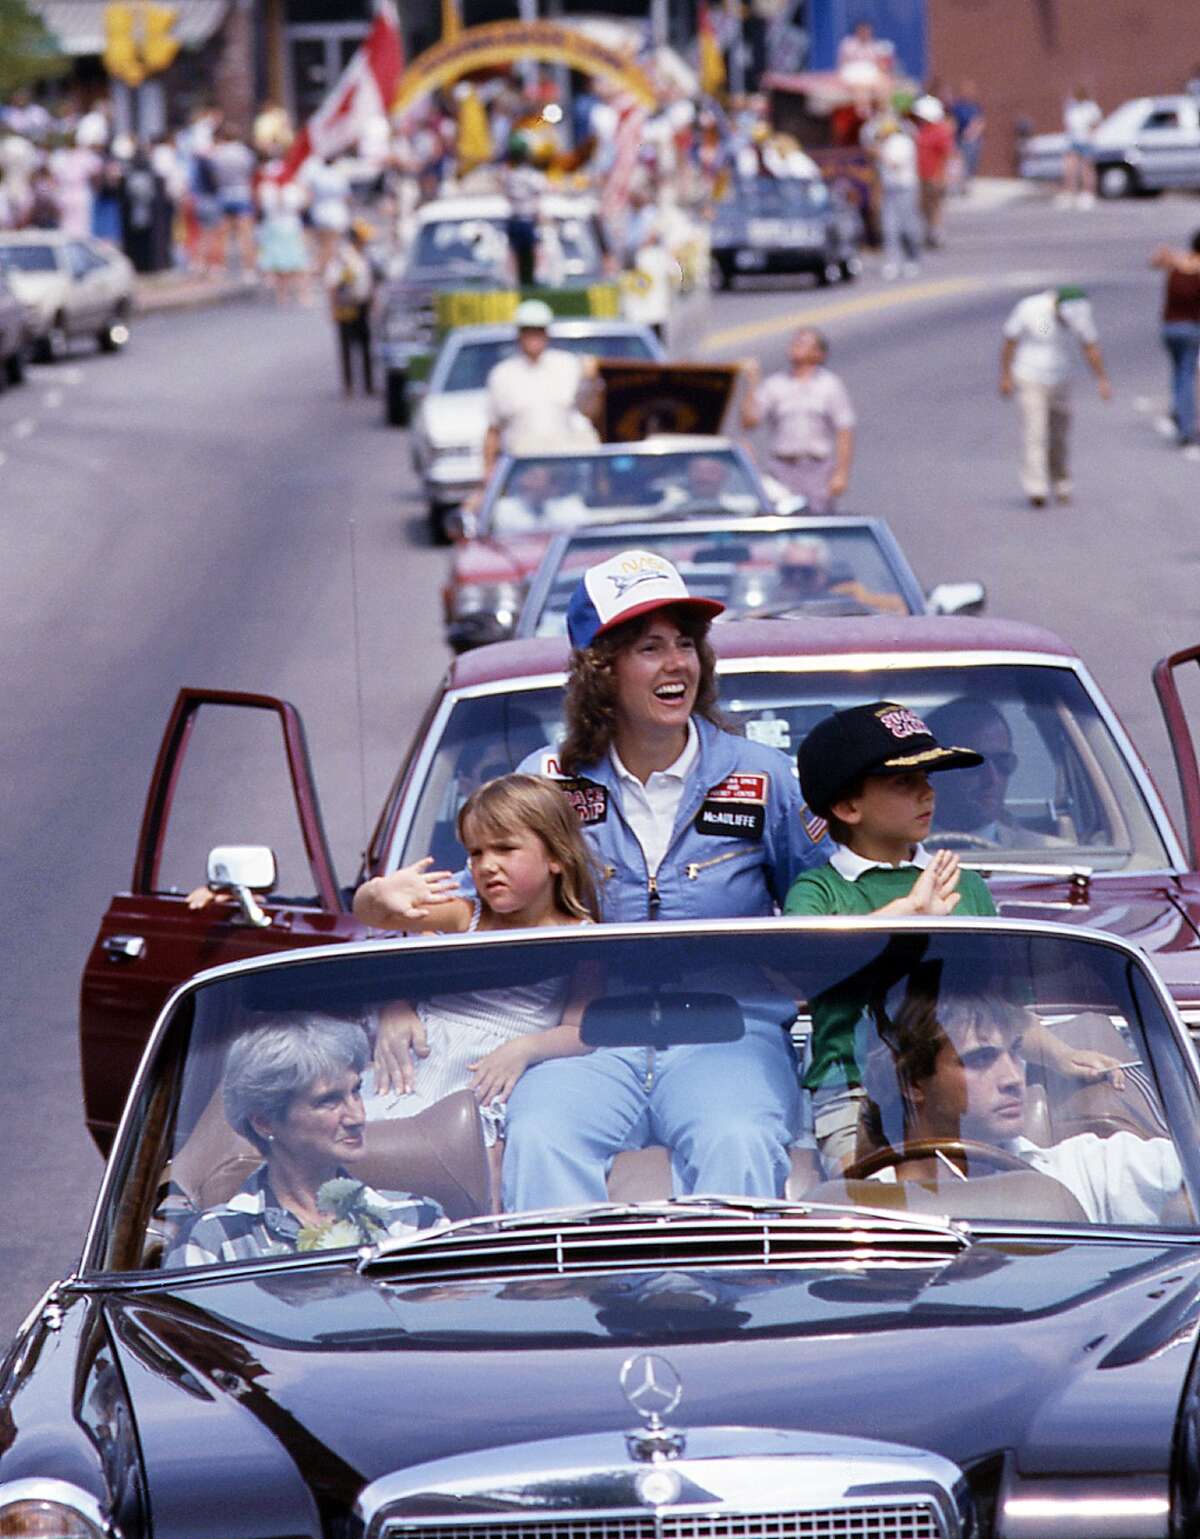 In this 1985 photo, high school teacher Christa McAuliffe rides with her children Caroline, left, and Scott during a parade down Main Street in Concord, N.H. McAuliffe was one of seven crew members killed in the Space Shuttle Challenger explosion on Jan. 28, 1986. (AP Photo/Jim Cole)